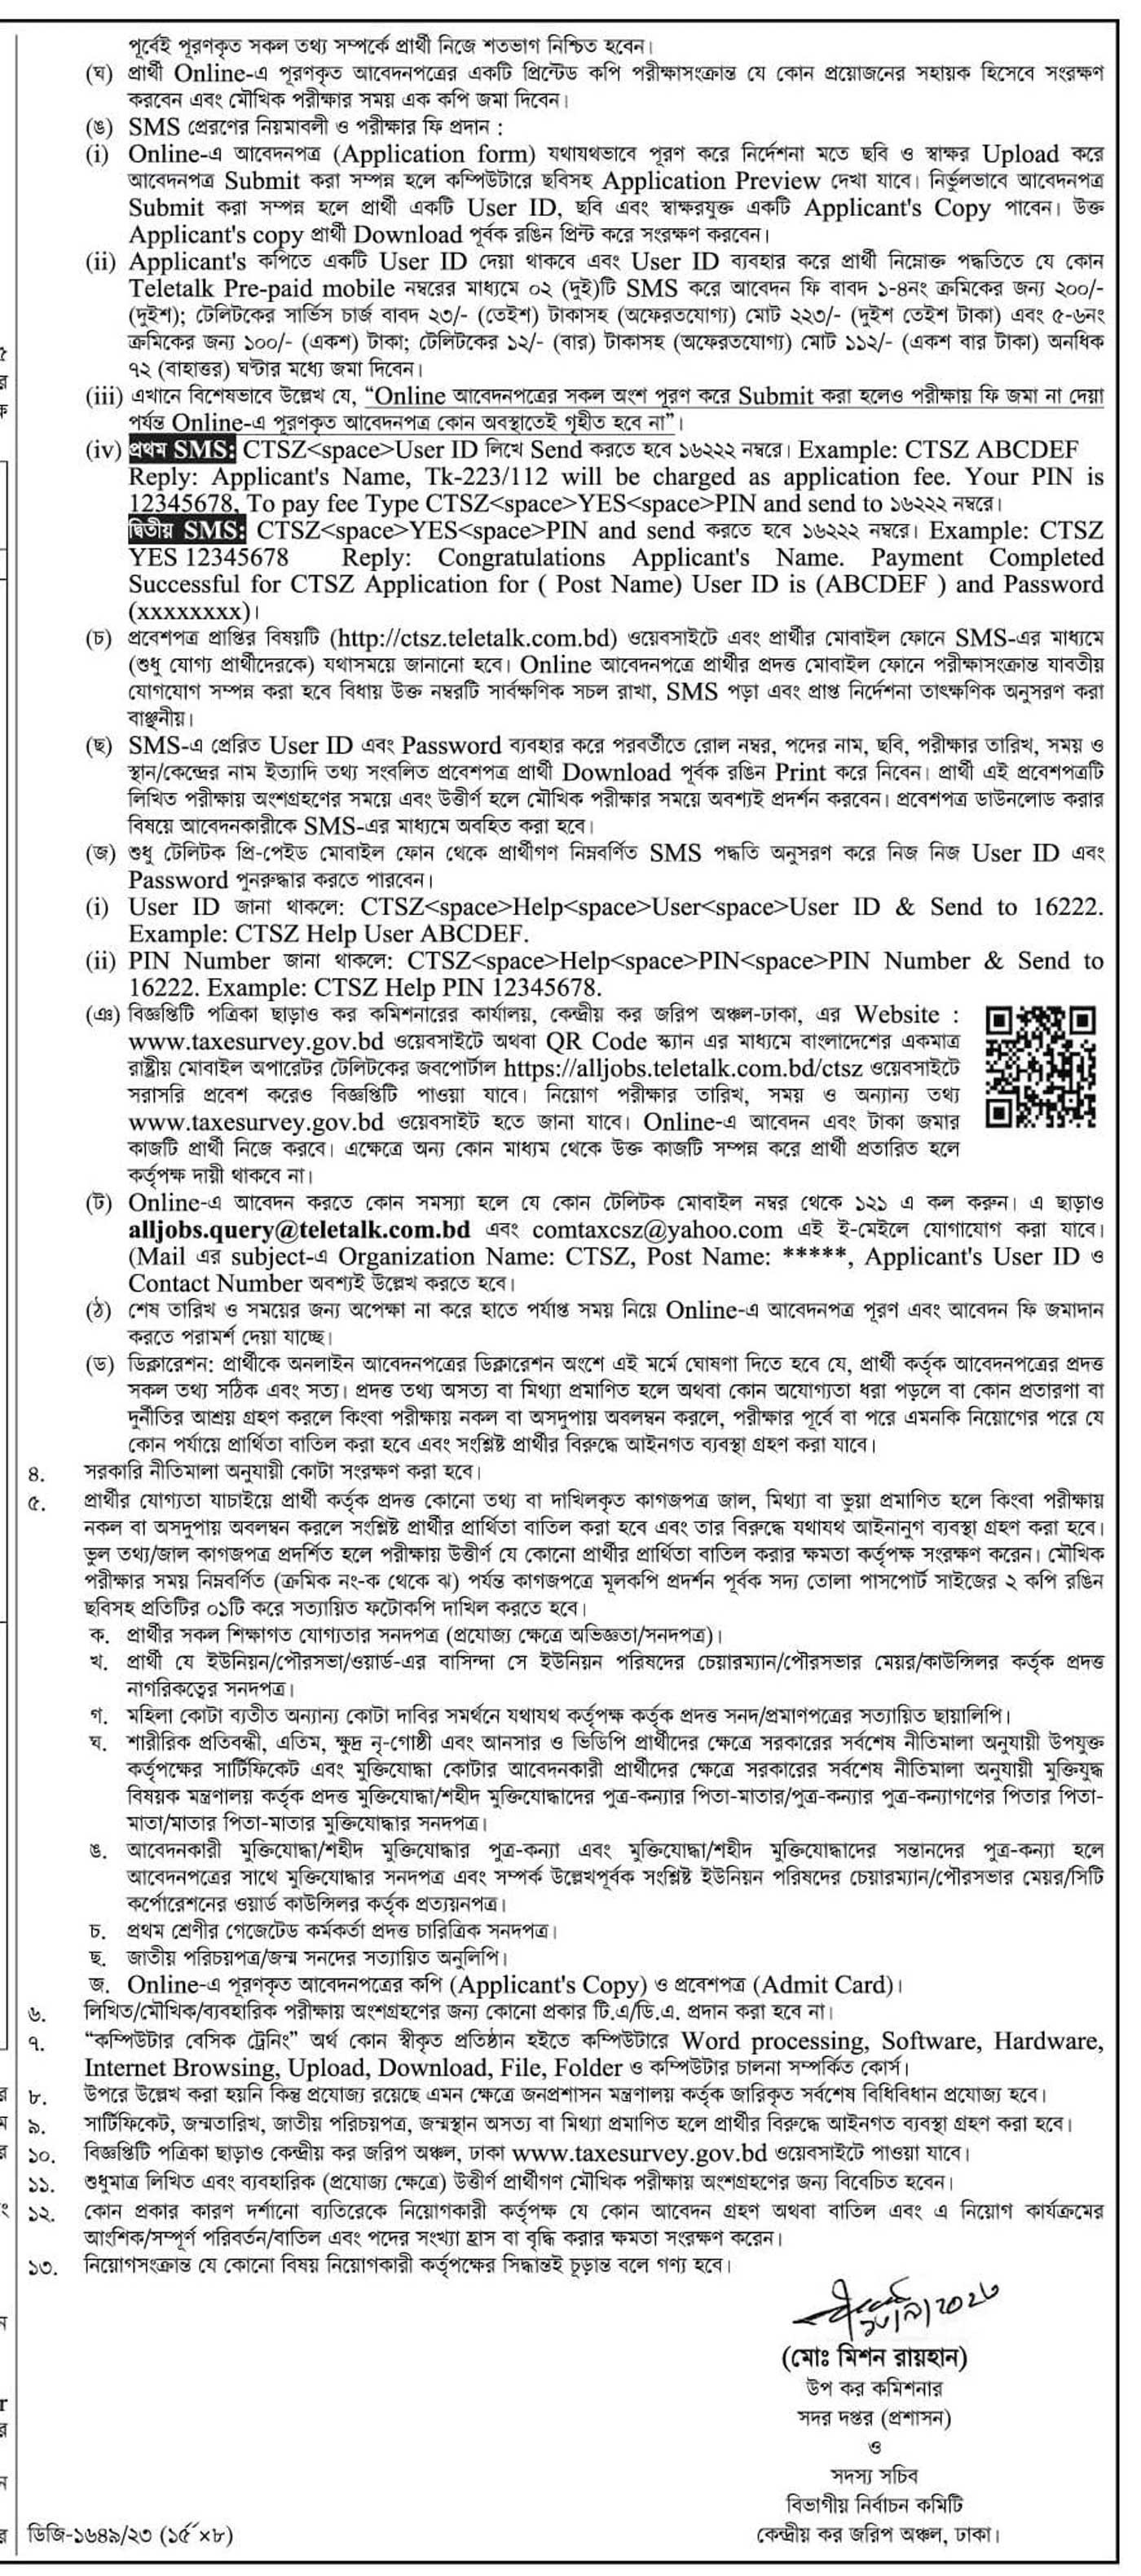 Office of Tax Commissioner Appeal Dhaka Job Circular 2023